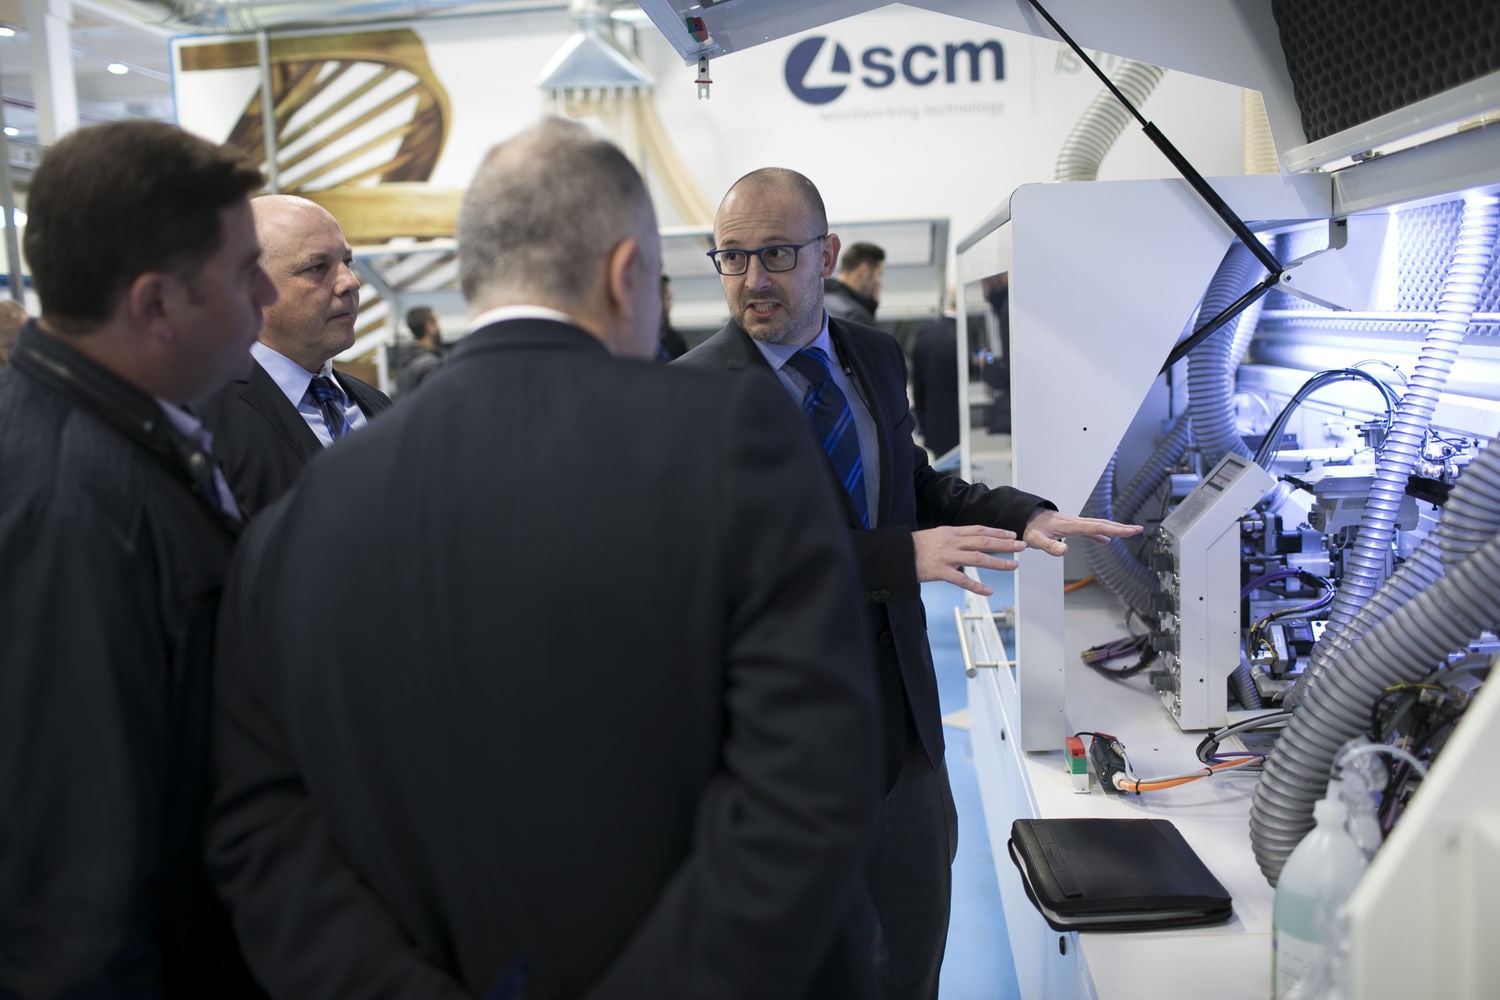 “On the Leading Edgebanding”: excellent results at the SCM event